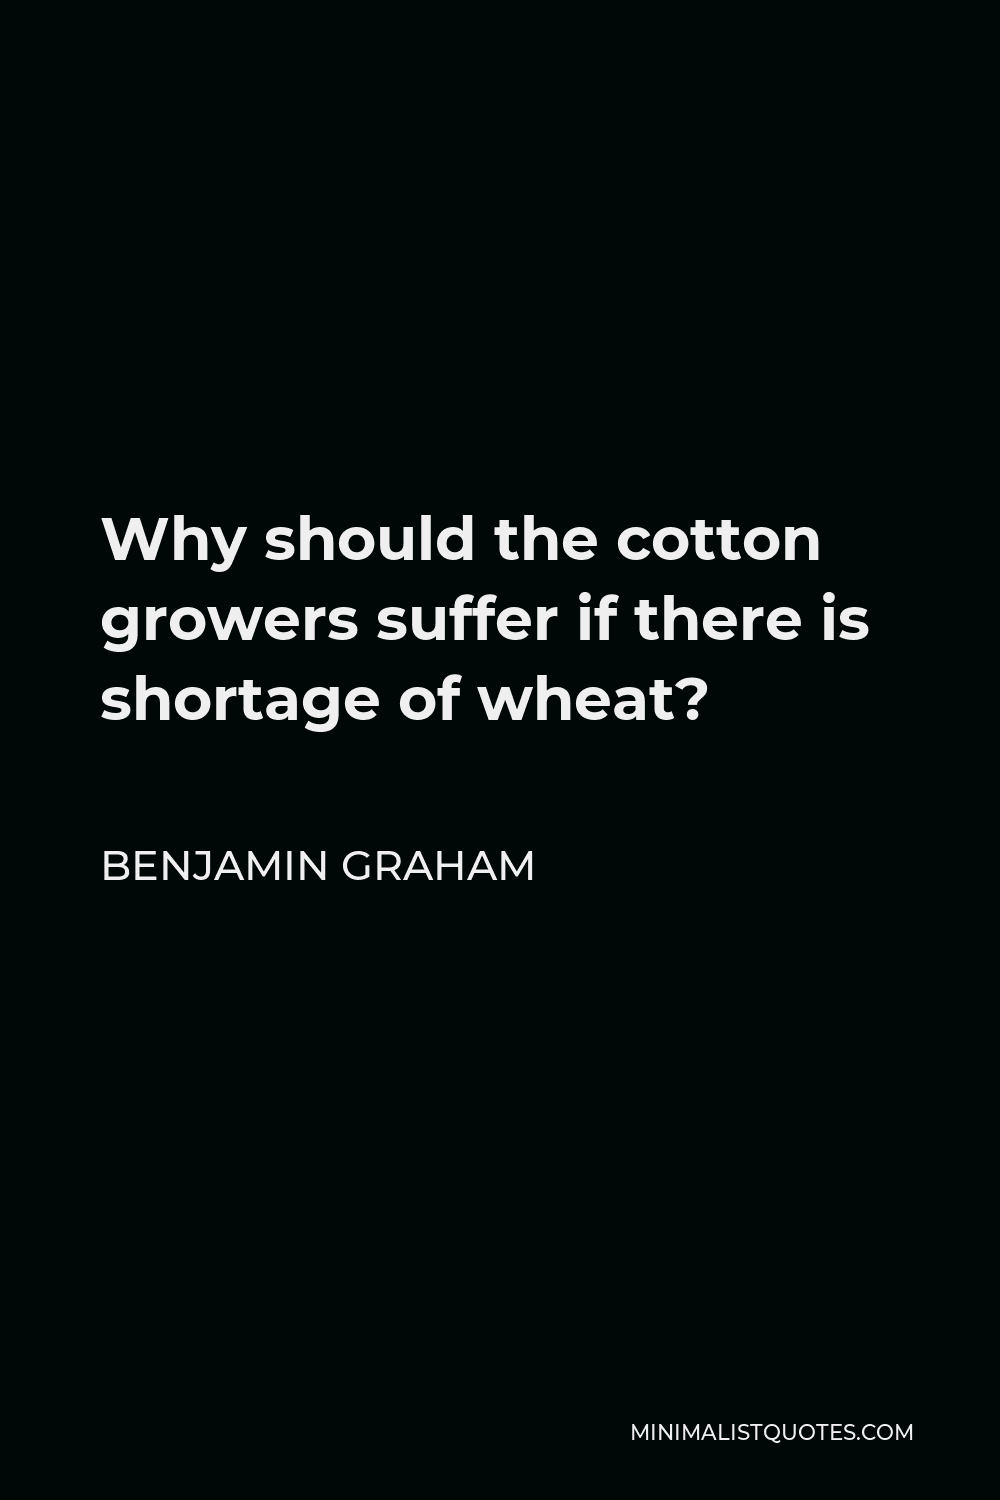 Benjamin Graham Quote - Why should the cotton growers suffer if there is shortage of wheat?